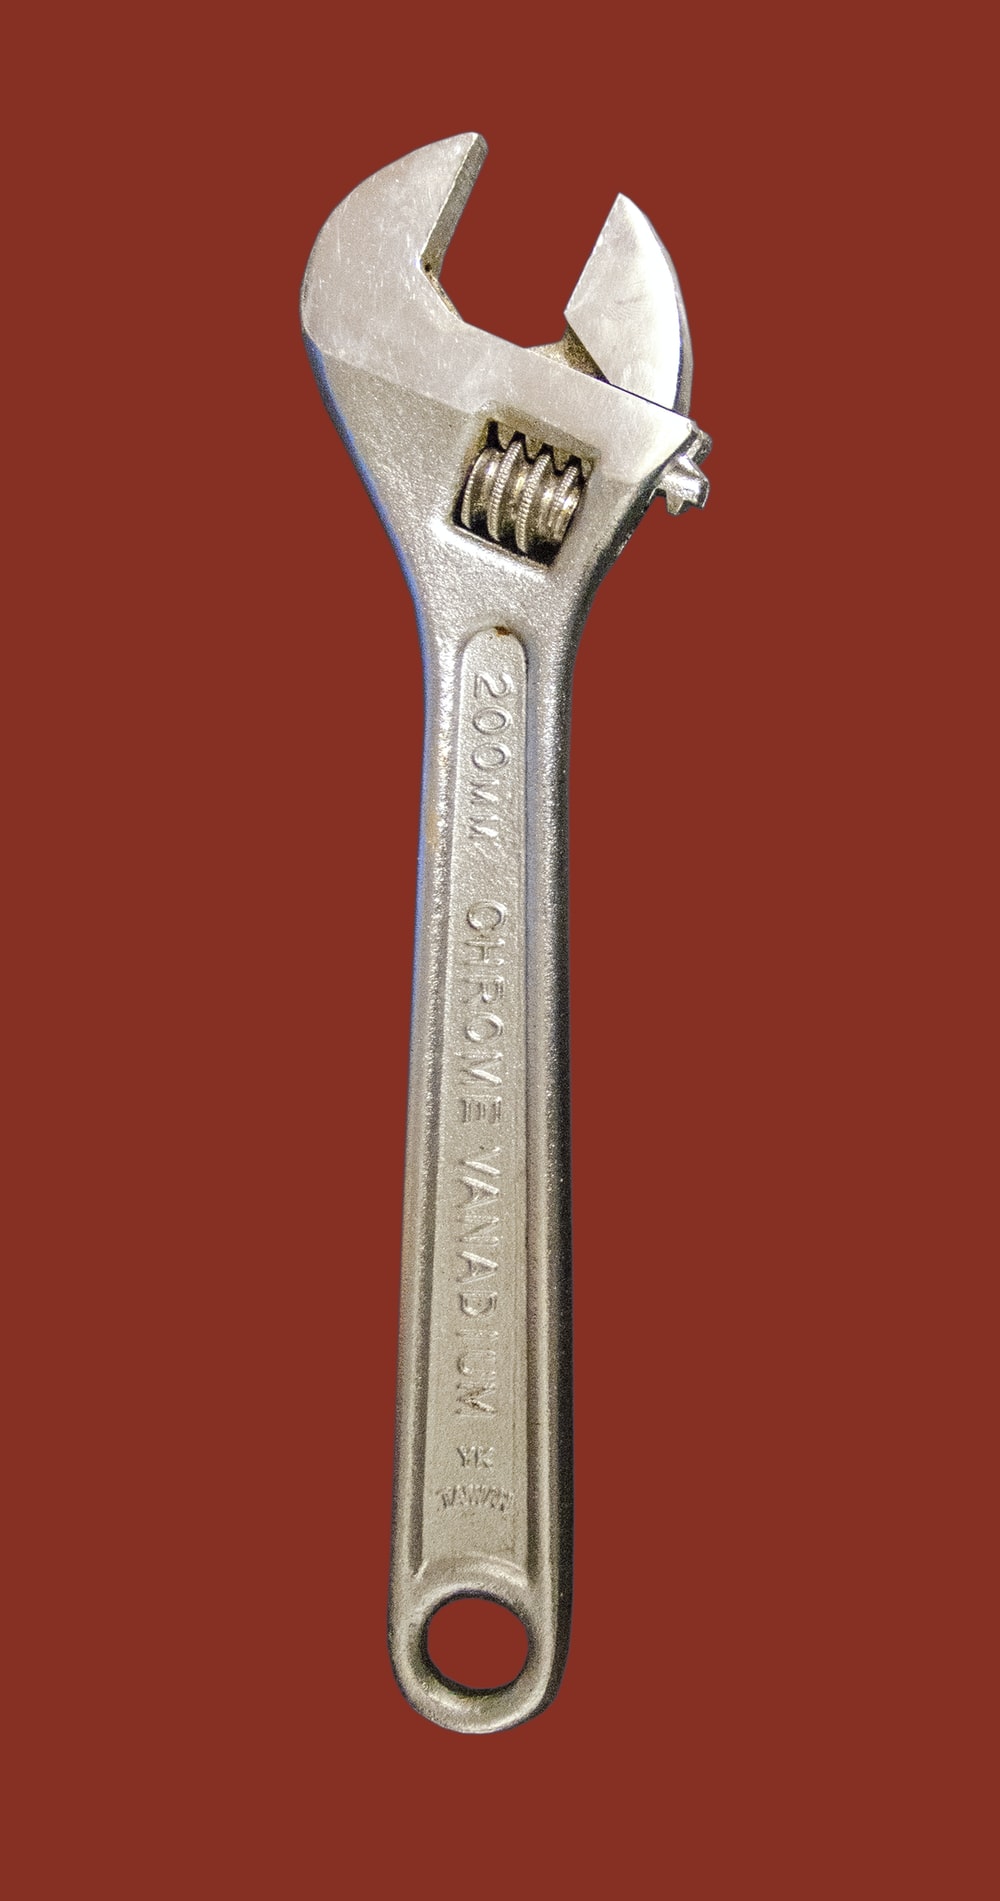 200mm wrench on red background